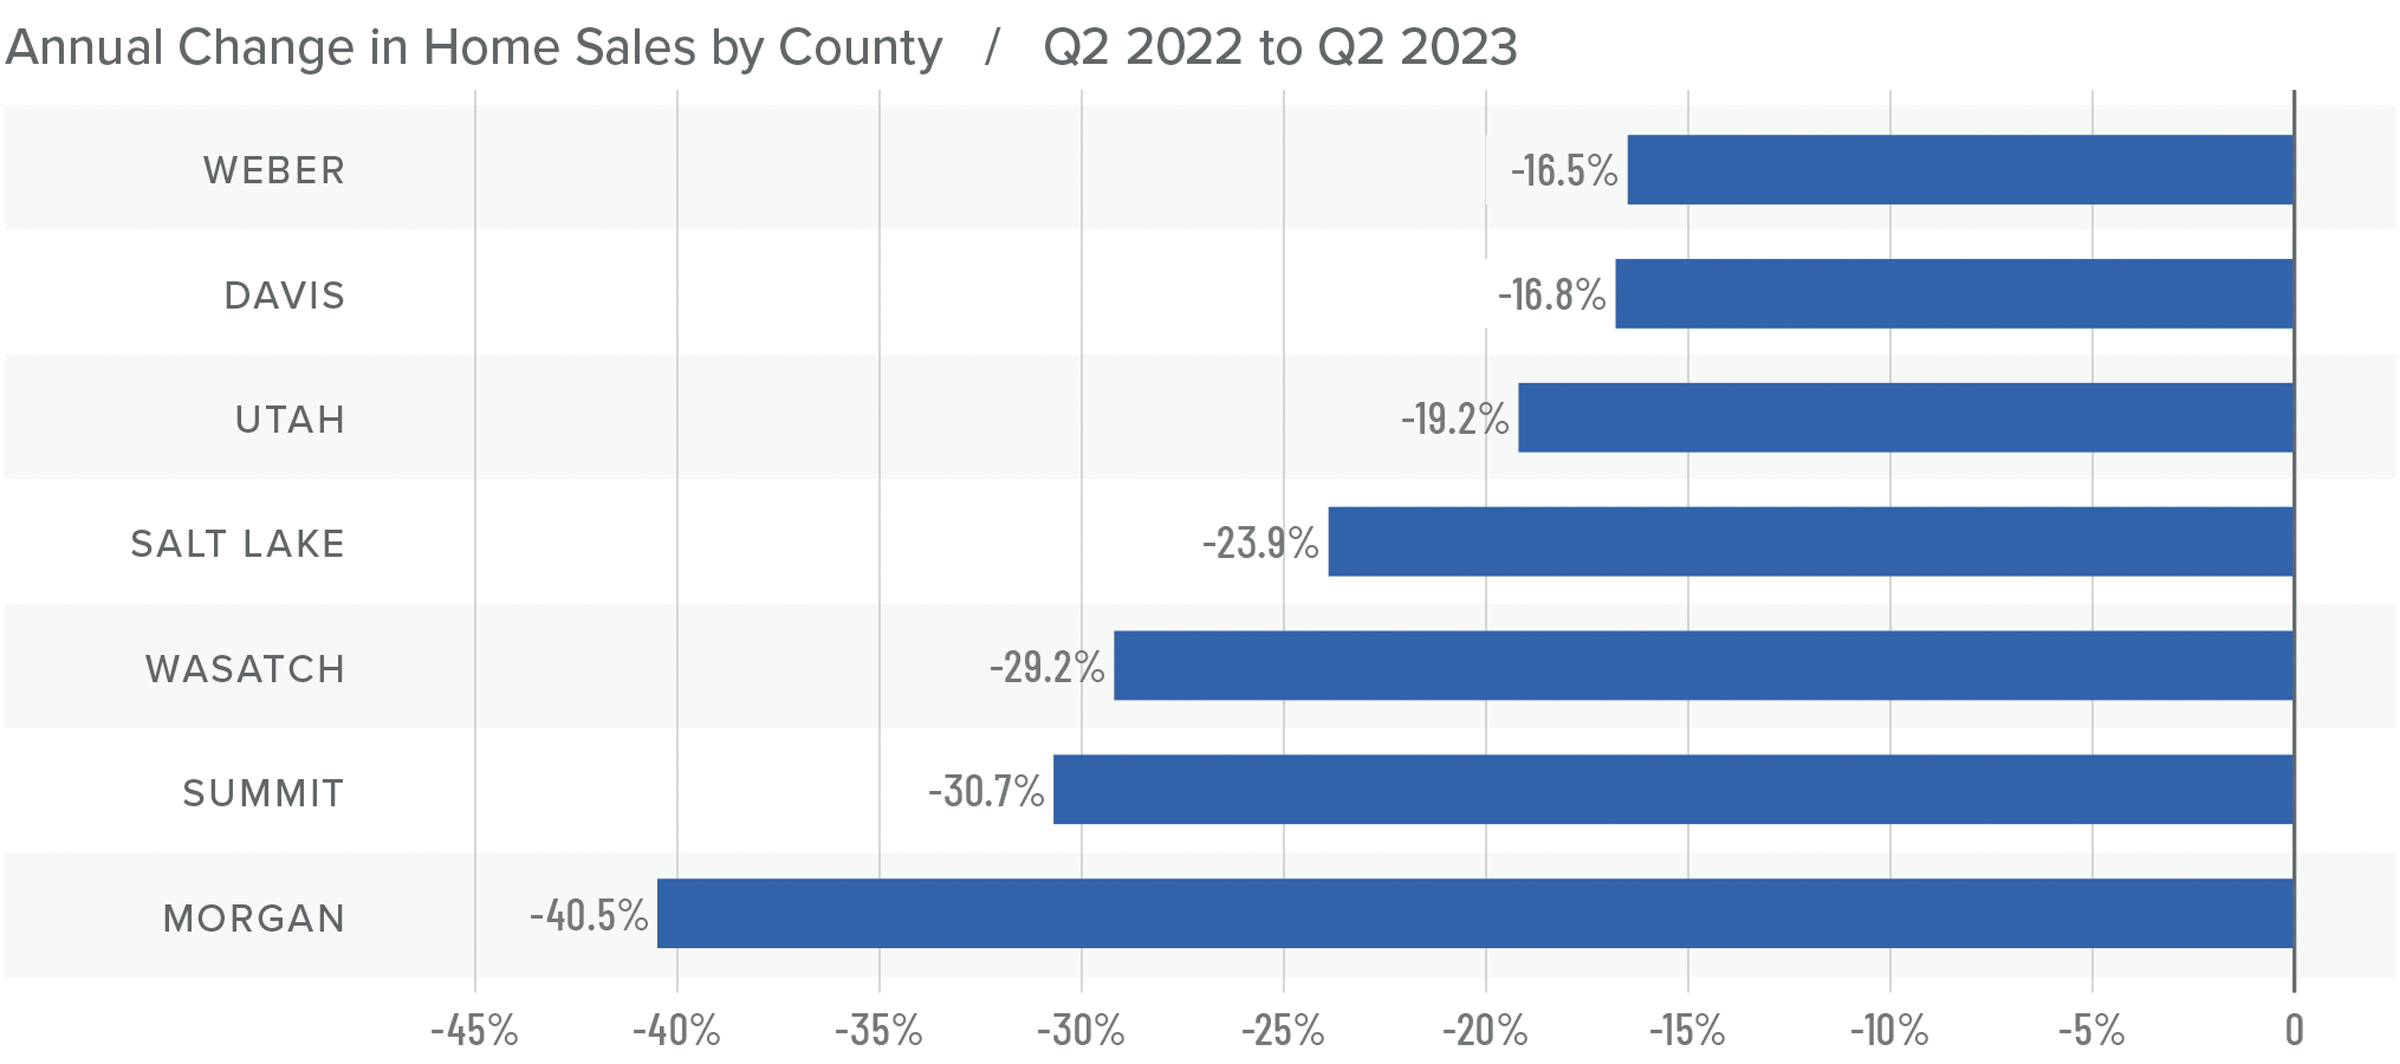 A graph showing the annual change in home sales by county for Utah from Q2 2022 to Q2 2023. Weber had the least drastic change at -16.5%, while Morgan had the largest change at -40.5%. Counties like Utah and Salt Lake were in the middle at around -20%.